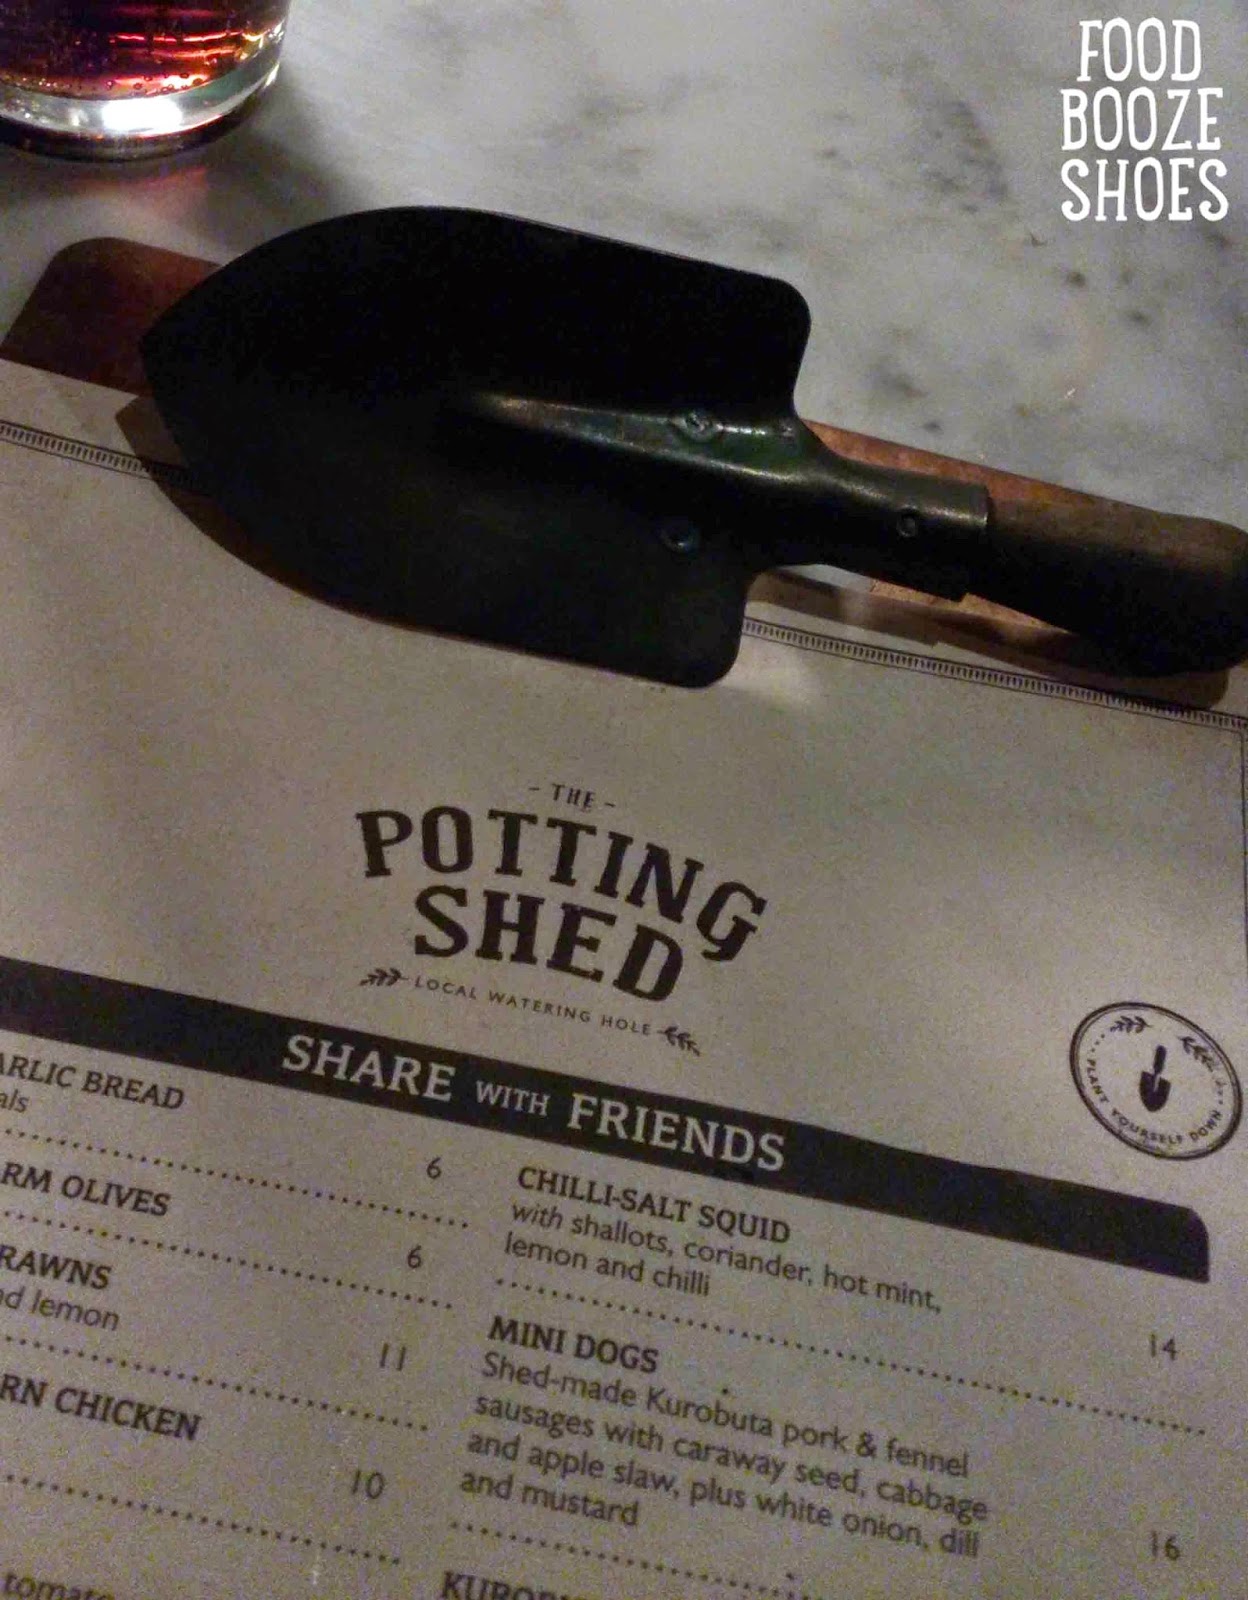 Food, booze and shoes: Pottering about The Potting Shed